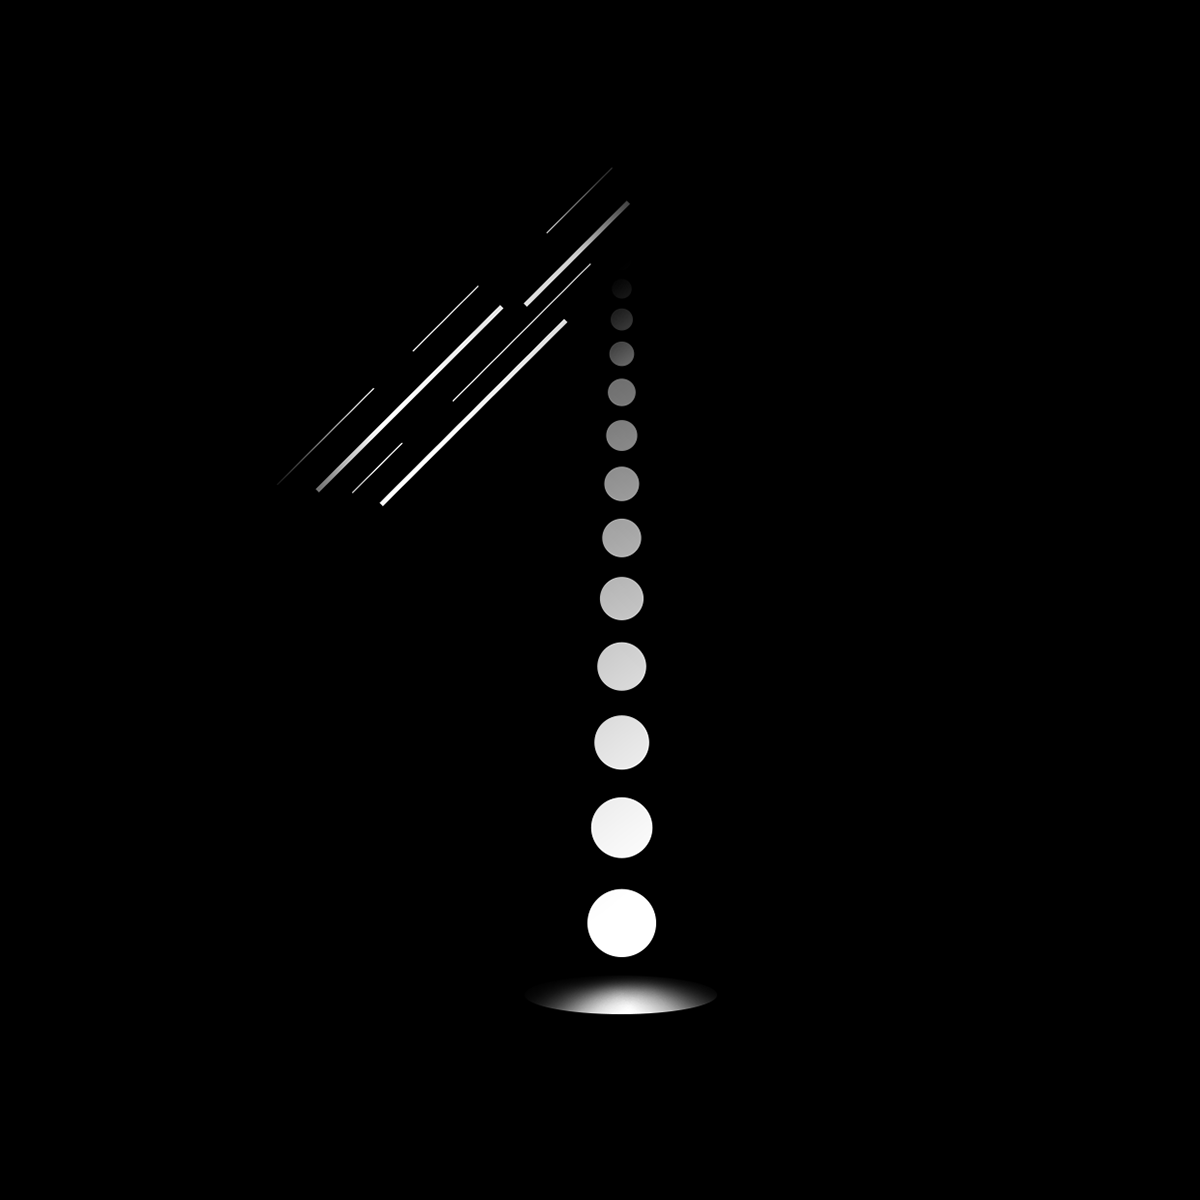 type numbers letters geometry shapes stripes 36days alphabet font White black experimental 36daysoftype